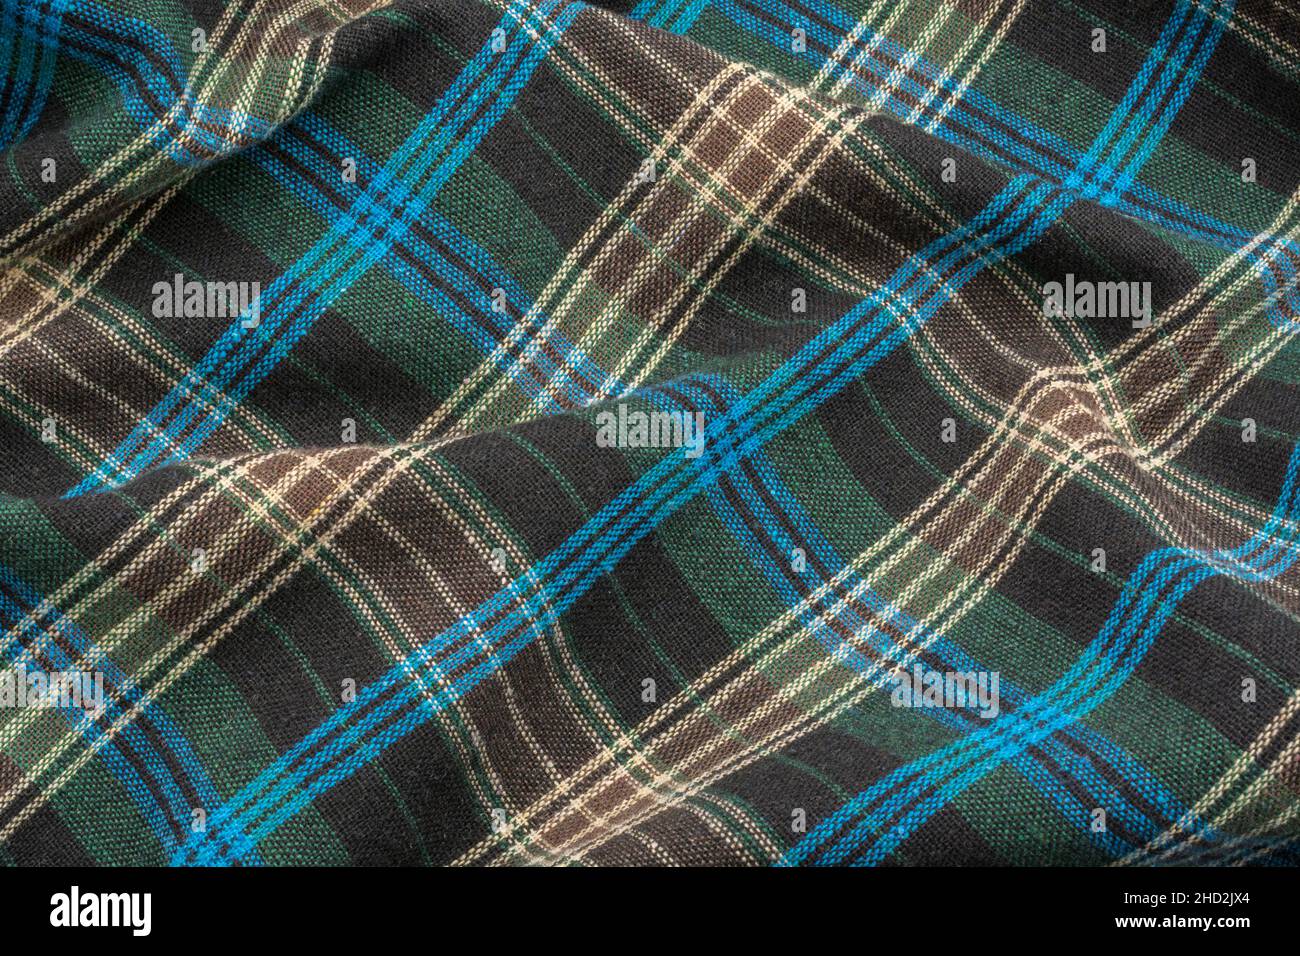 Close-up of blue check flannel fabric, showing warp and weft pattern thread pattern and blue stitching. Stitched line, lines of stitches. Stock Photo